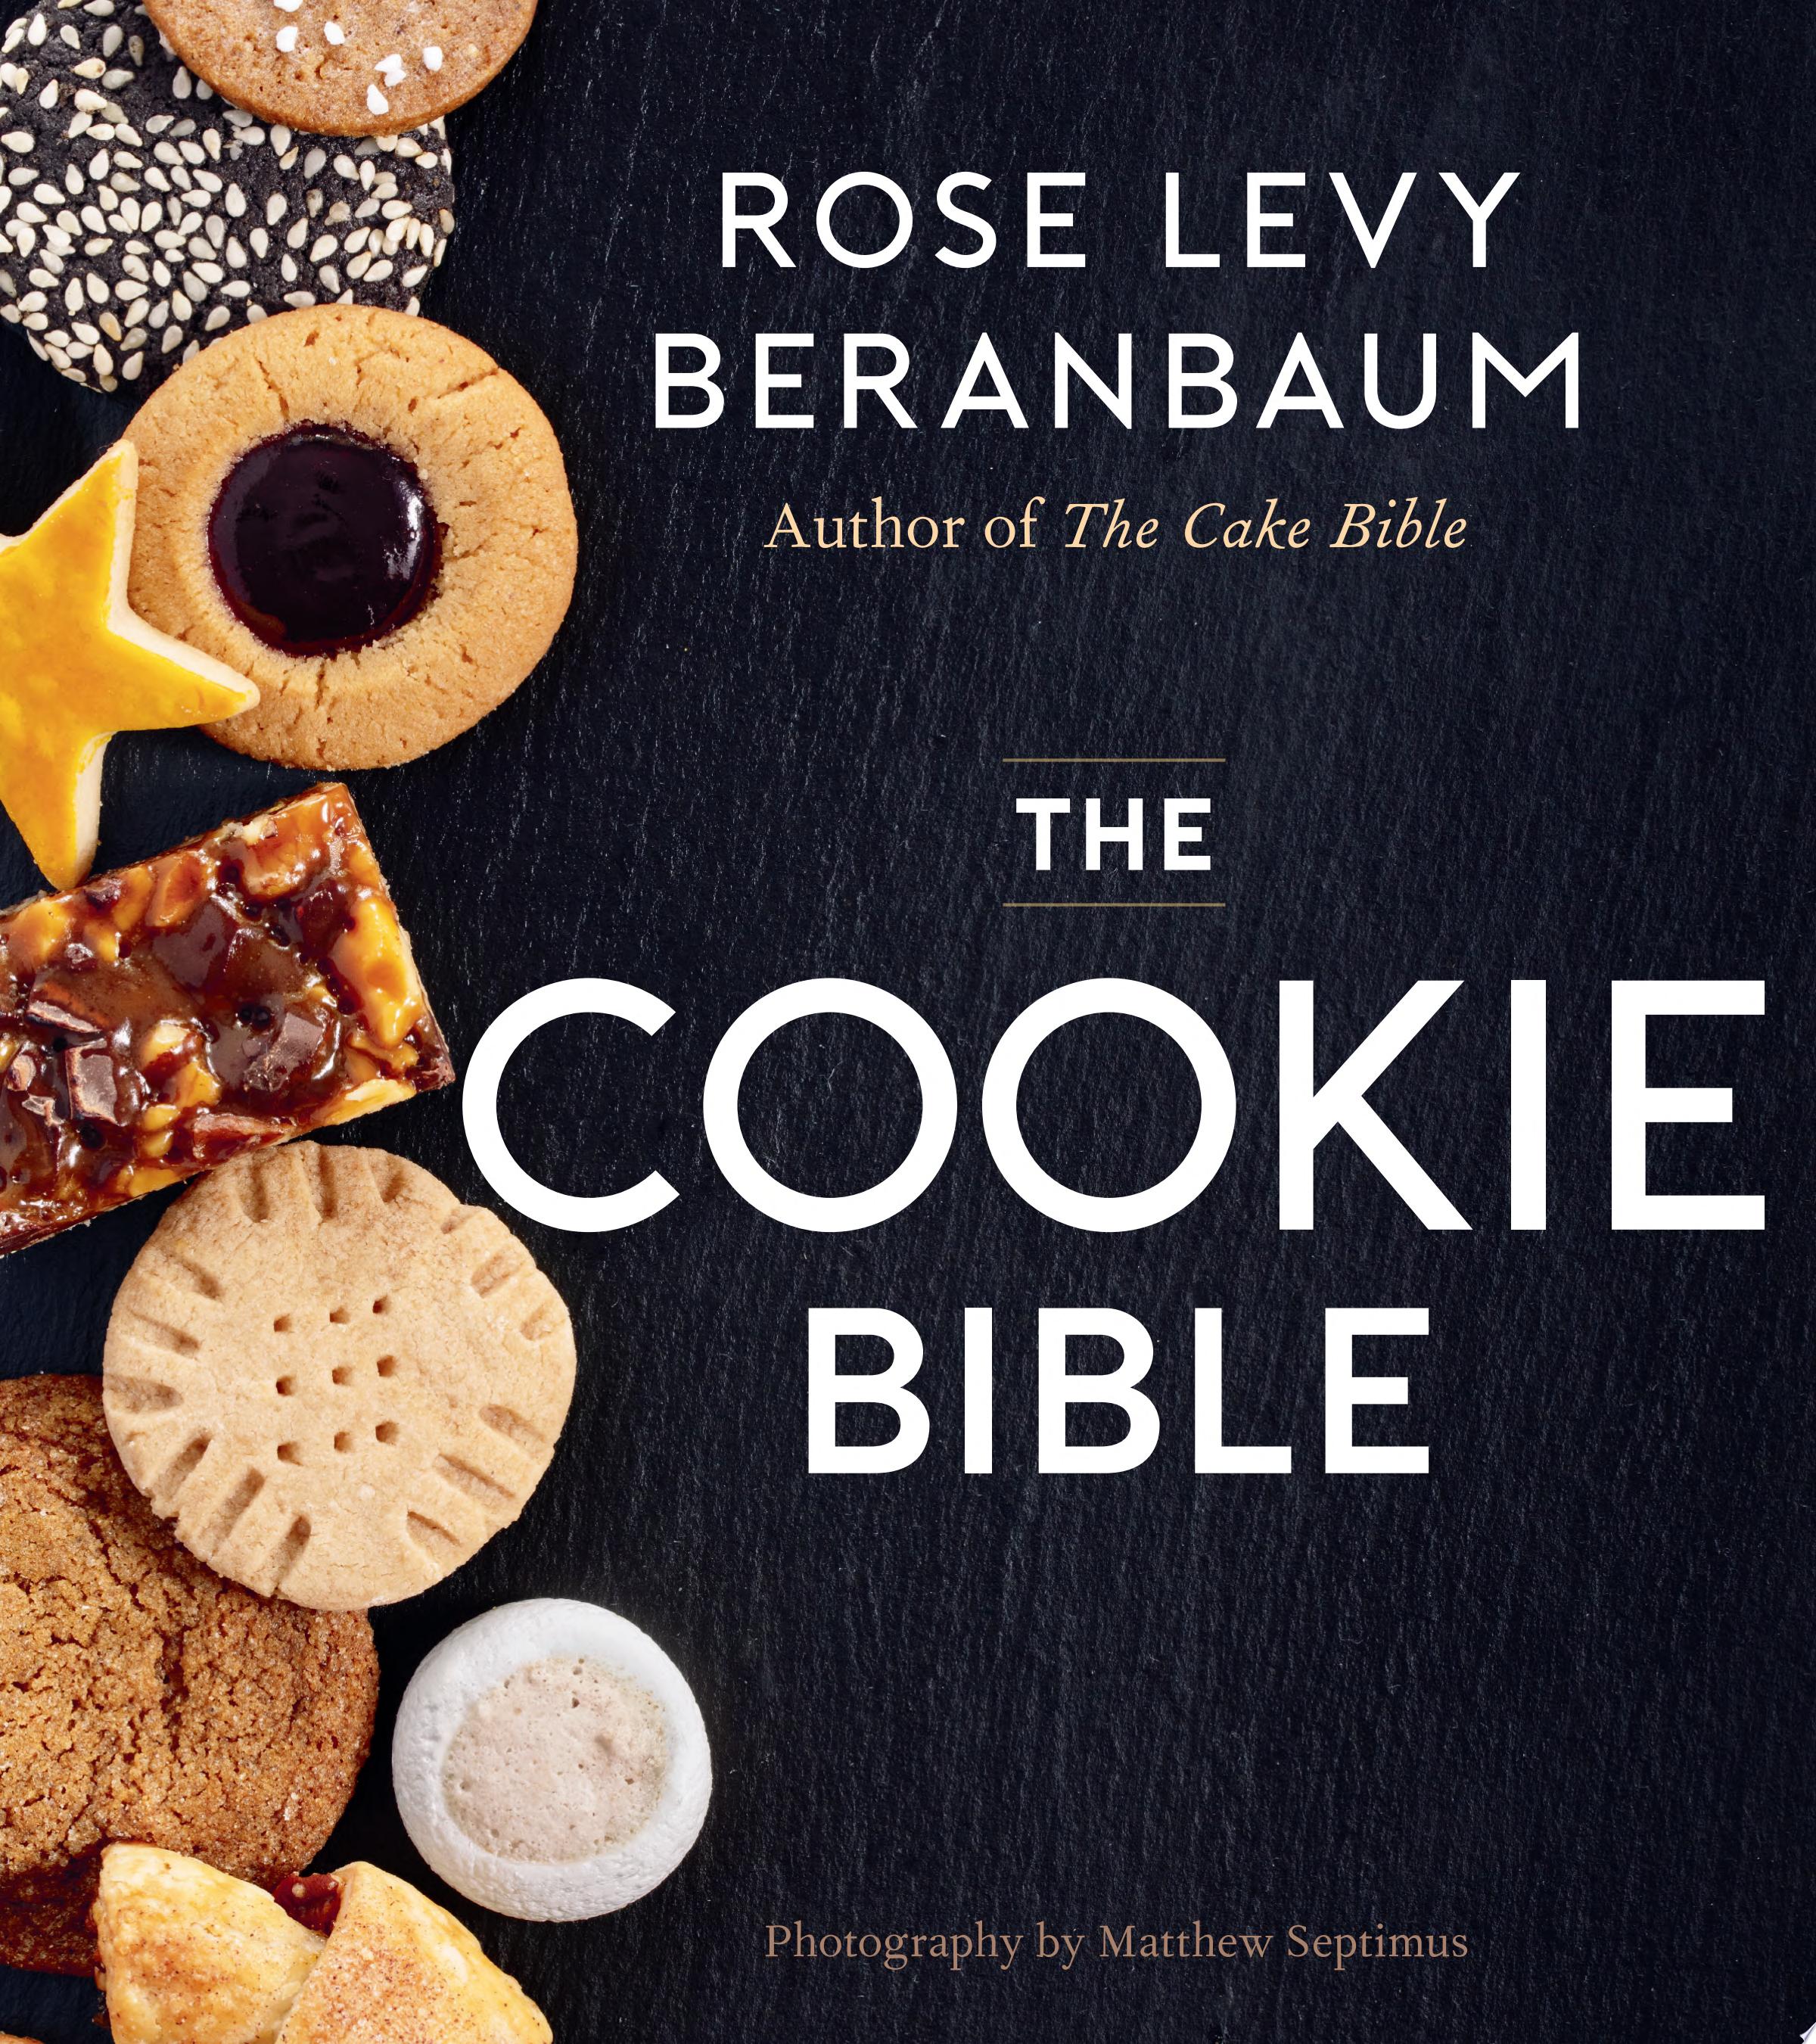 Image for "The Cookie Bible"